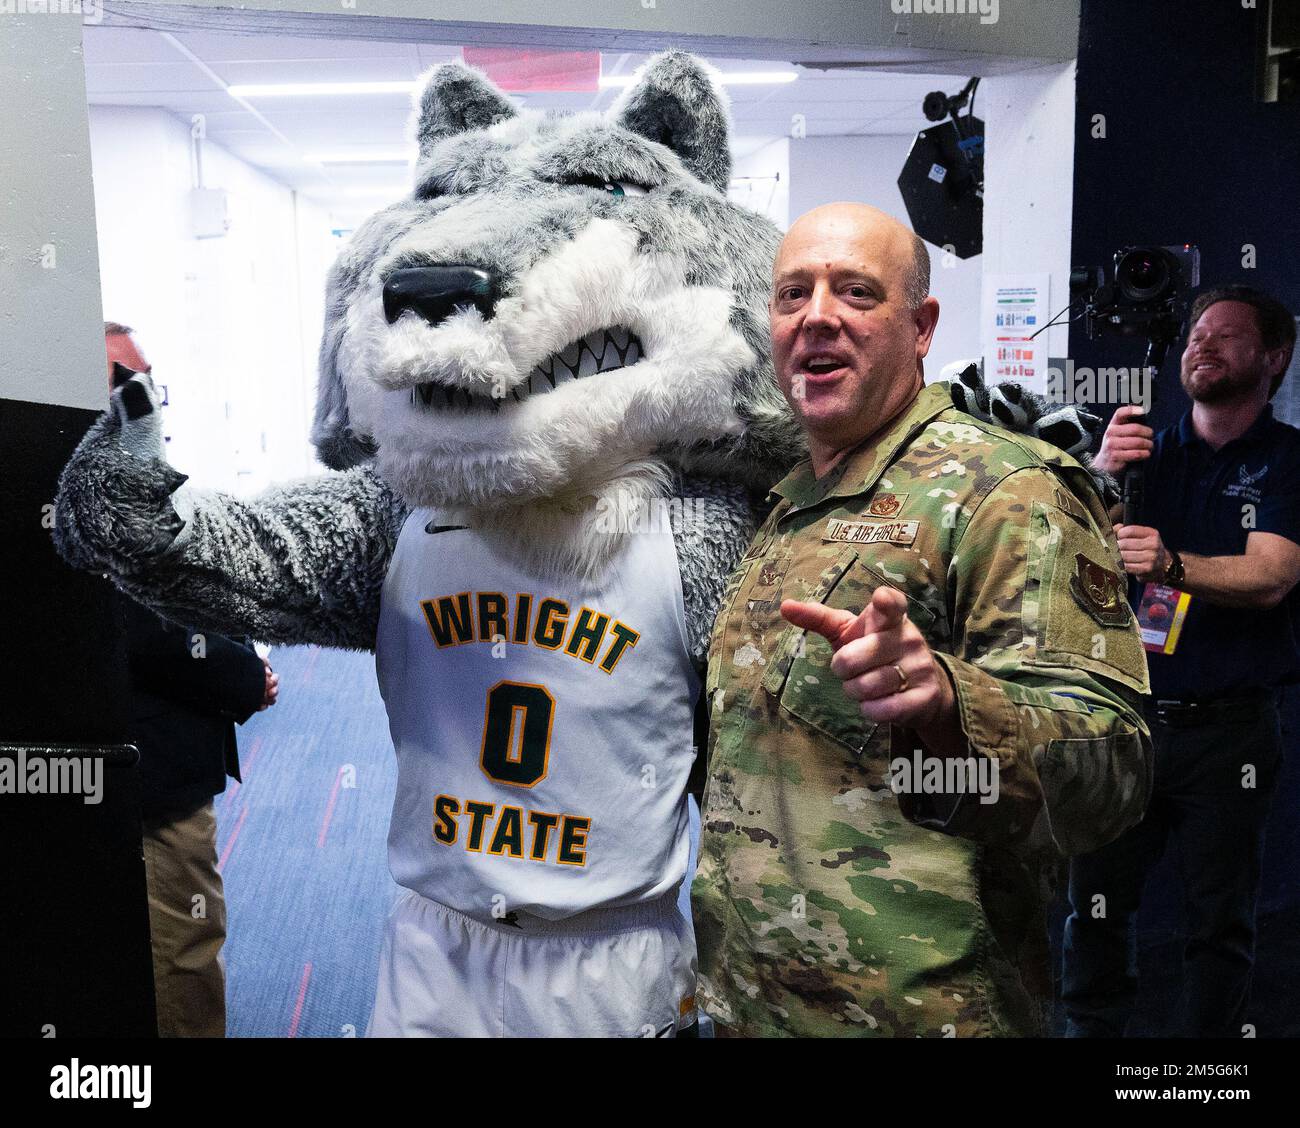 Wright State mascot Rowdy Raider and Col. Patrick Miller, 88th Air Base Wing and Wright-Patterson Air Force Base commander, pose March 16, 2022, prior to the opening ceremony of the NCAA men’s basketball tournament game between Wright State and Bryant. Wright State, a hometown team whose campus borders Wright-Patterson, went on to win the game and advance to the next round of tournament play. Stock Photo